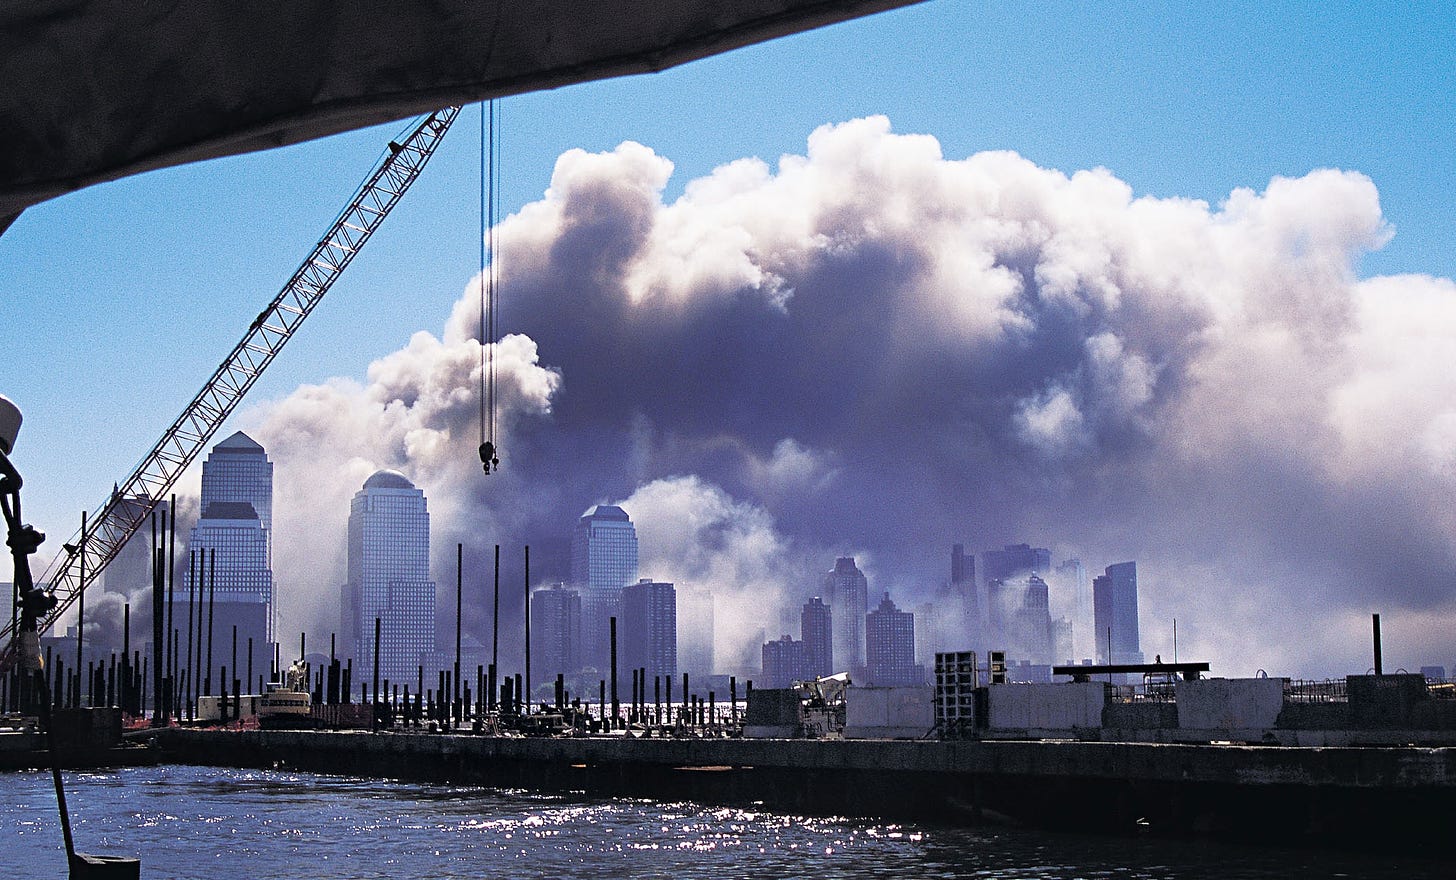 Channel 4 to broadcast footage of 9/11 New York attacks filmed from ...